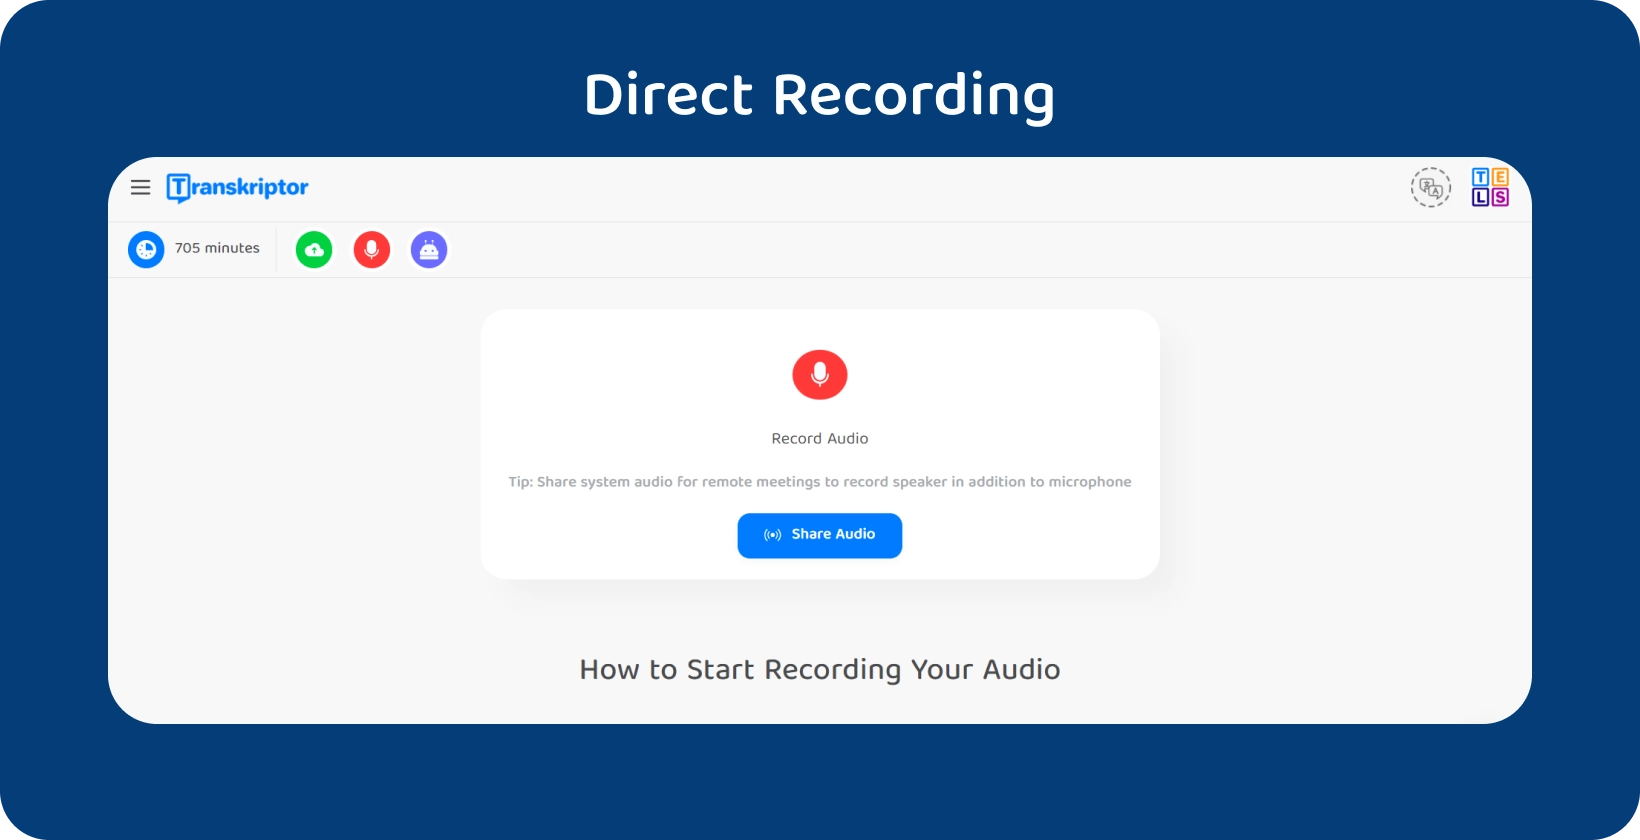 Direct audio recording feature in Transkriptor for qualitative research interviews, with a 705-minute capacity.